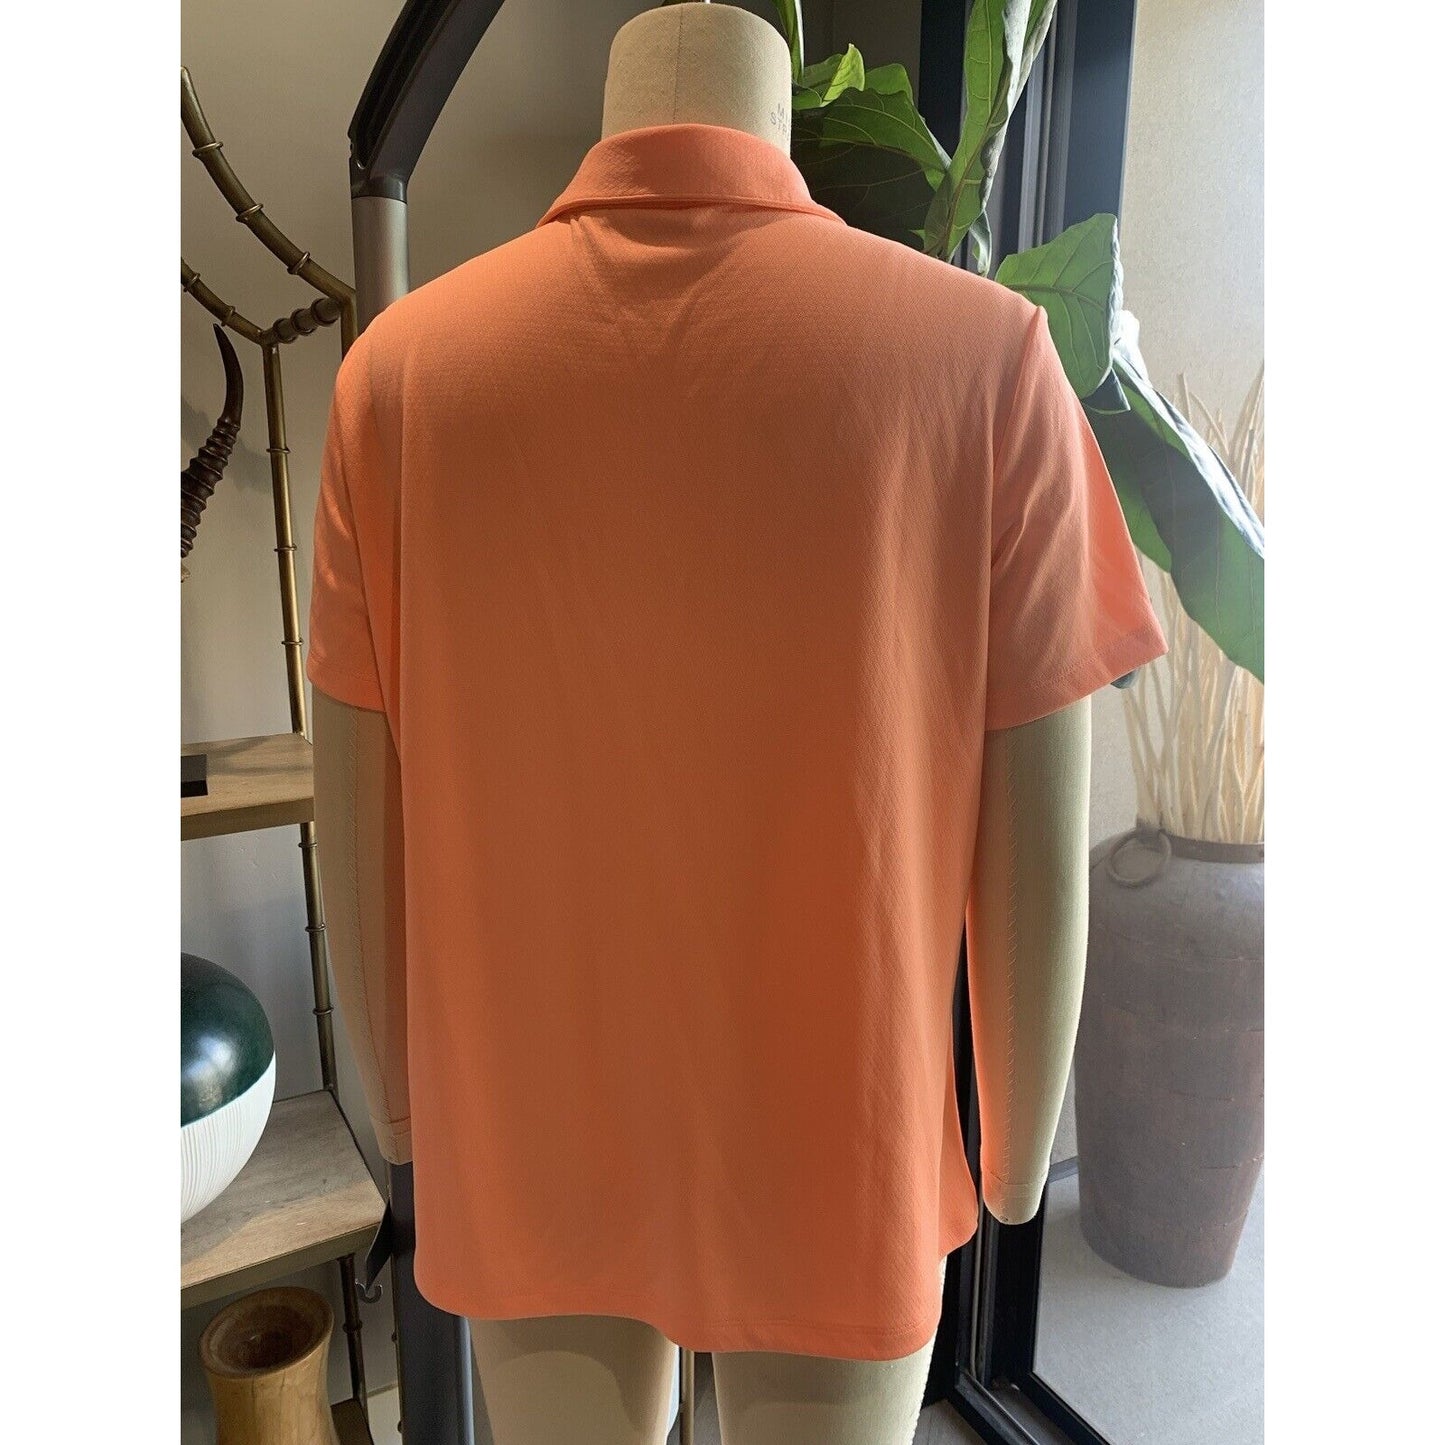 Rear View Of Women's Melon Colored Golf Shirt